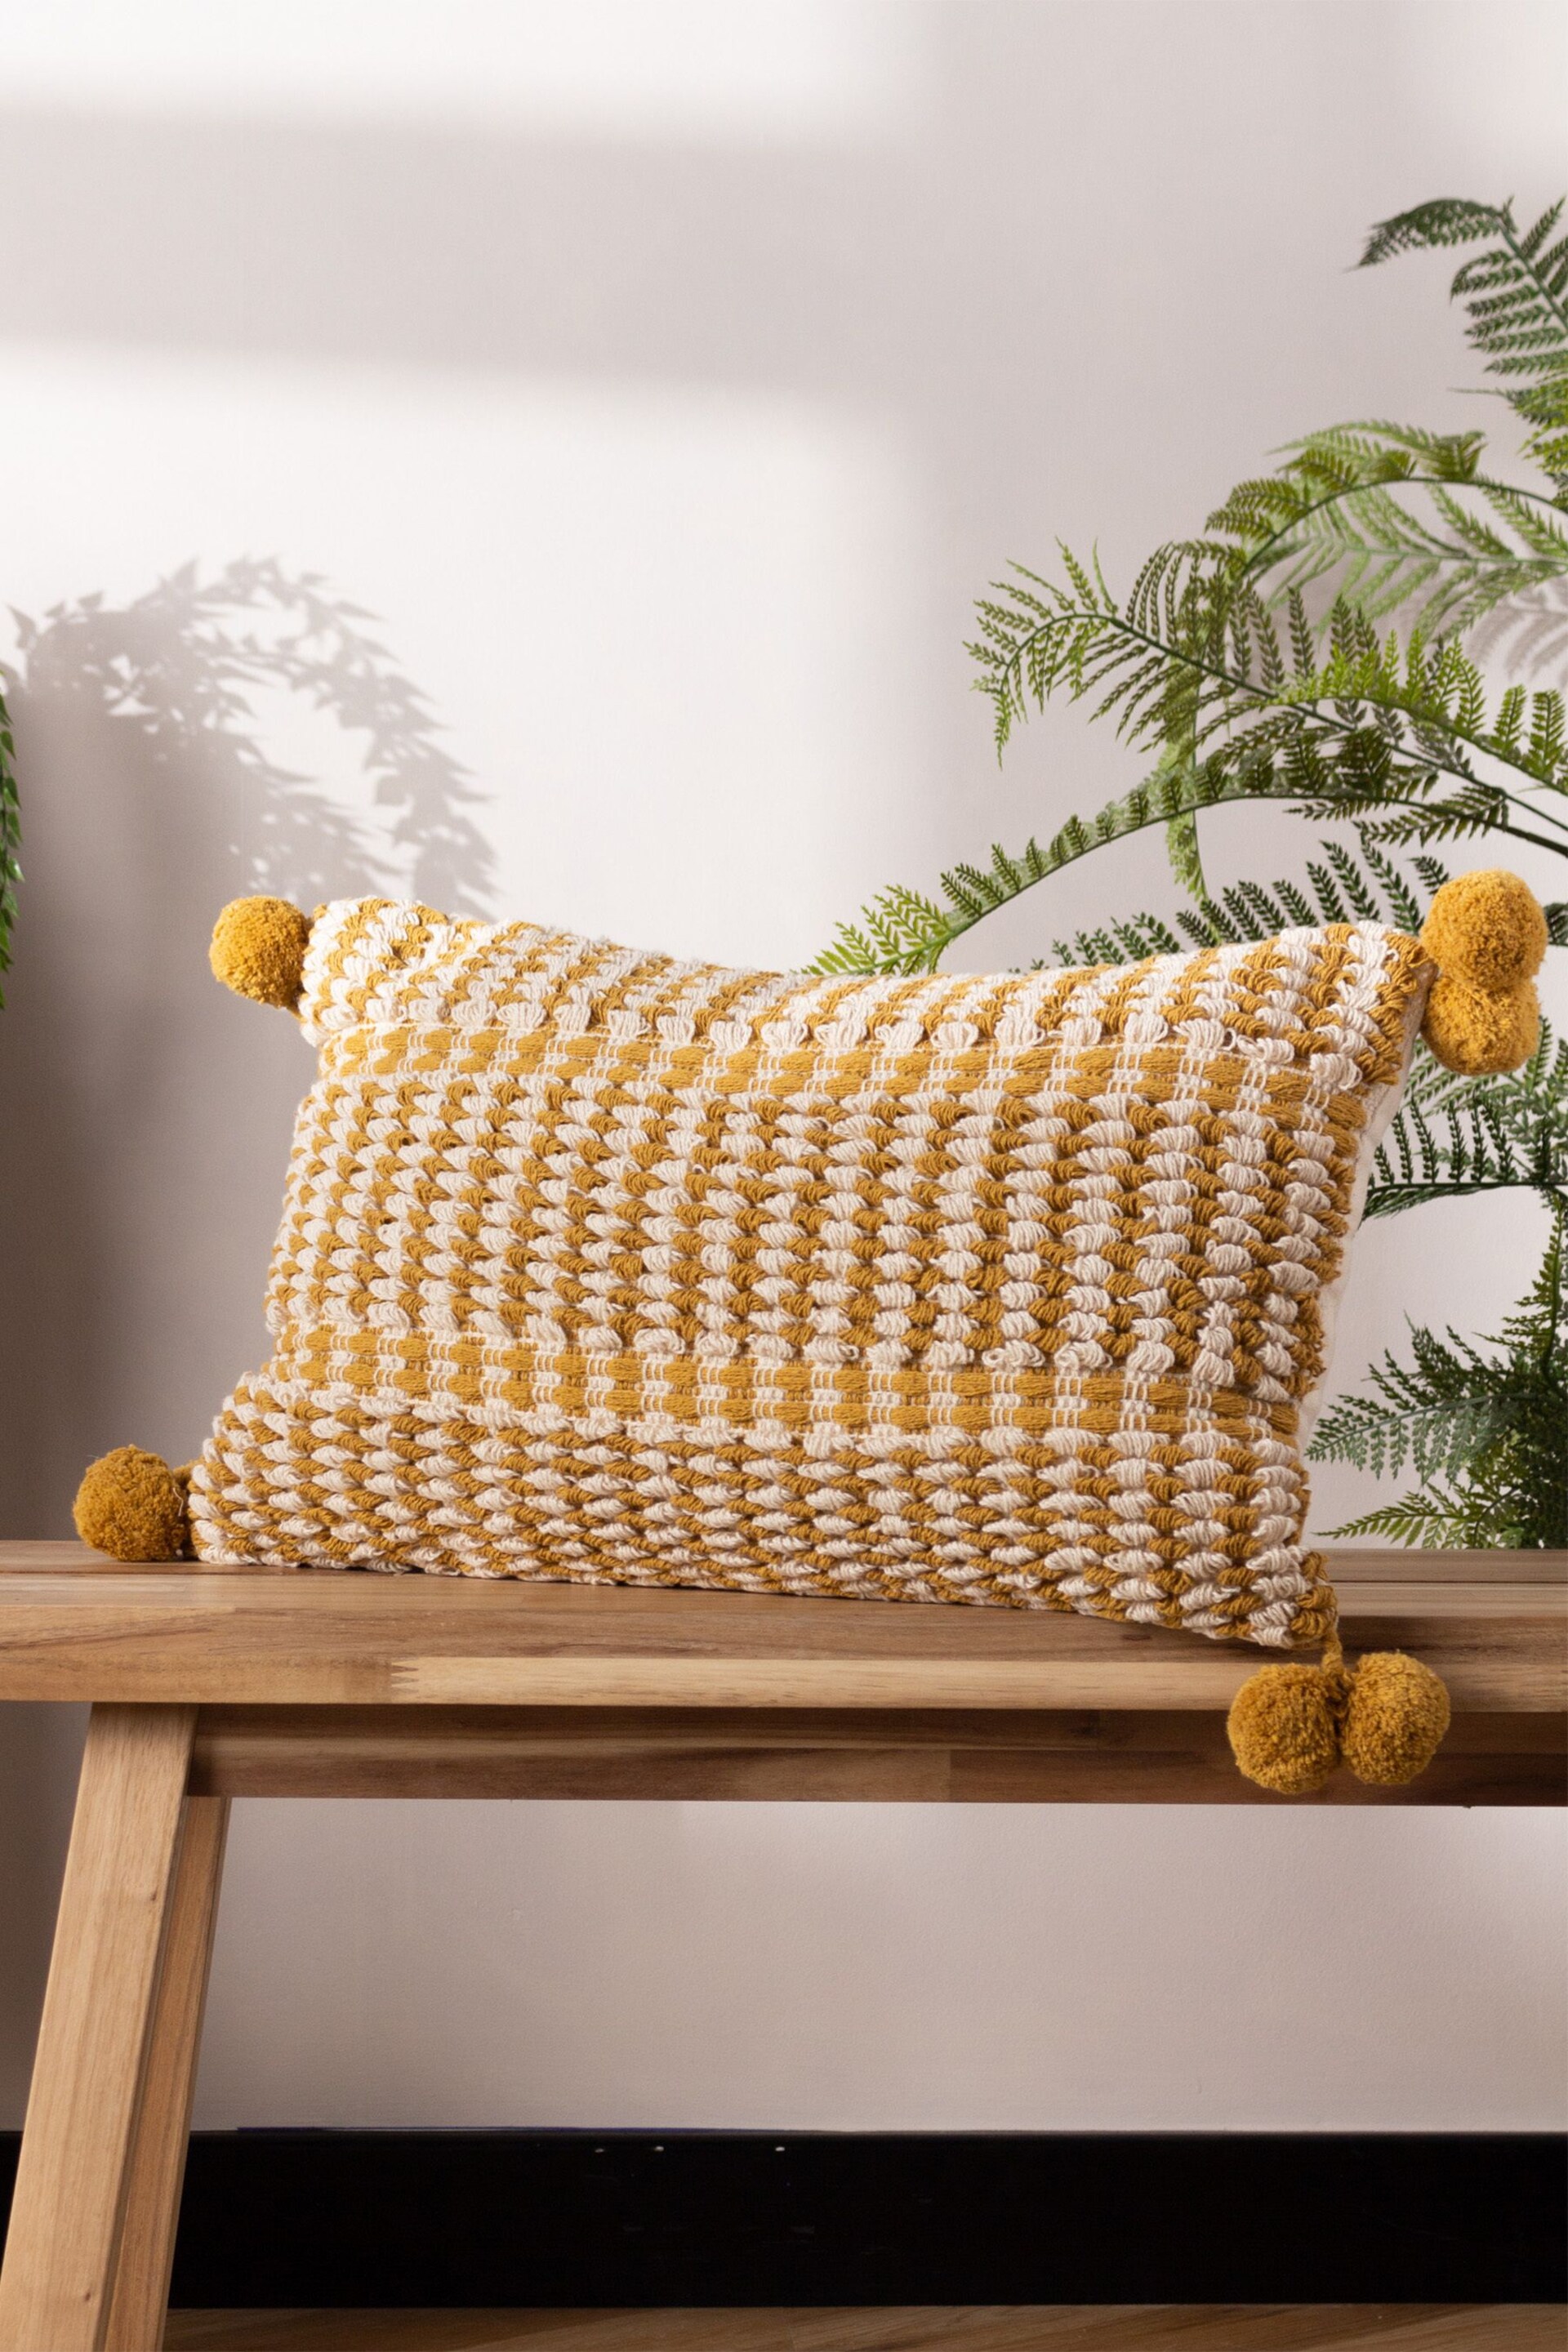 furn. Yellow Ayaan Woven Loop Tufted Cotton Double Pom Pom Cushion - Image 4 of 5